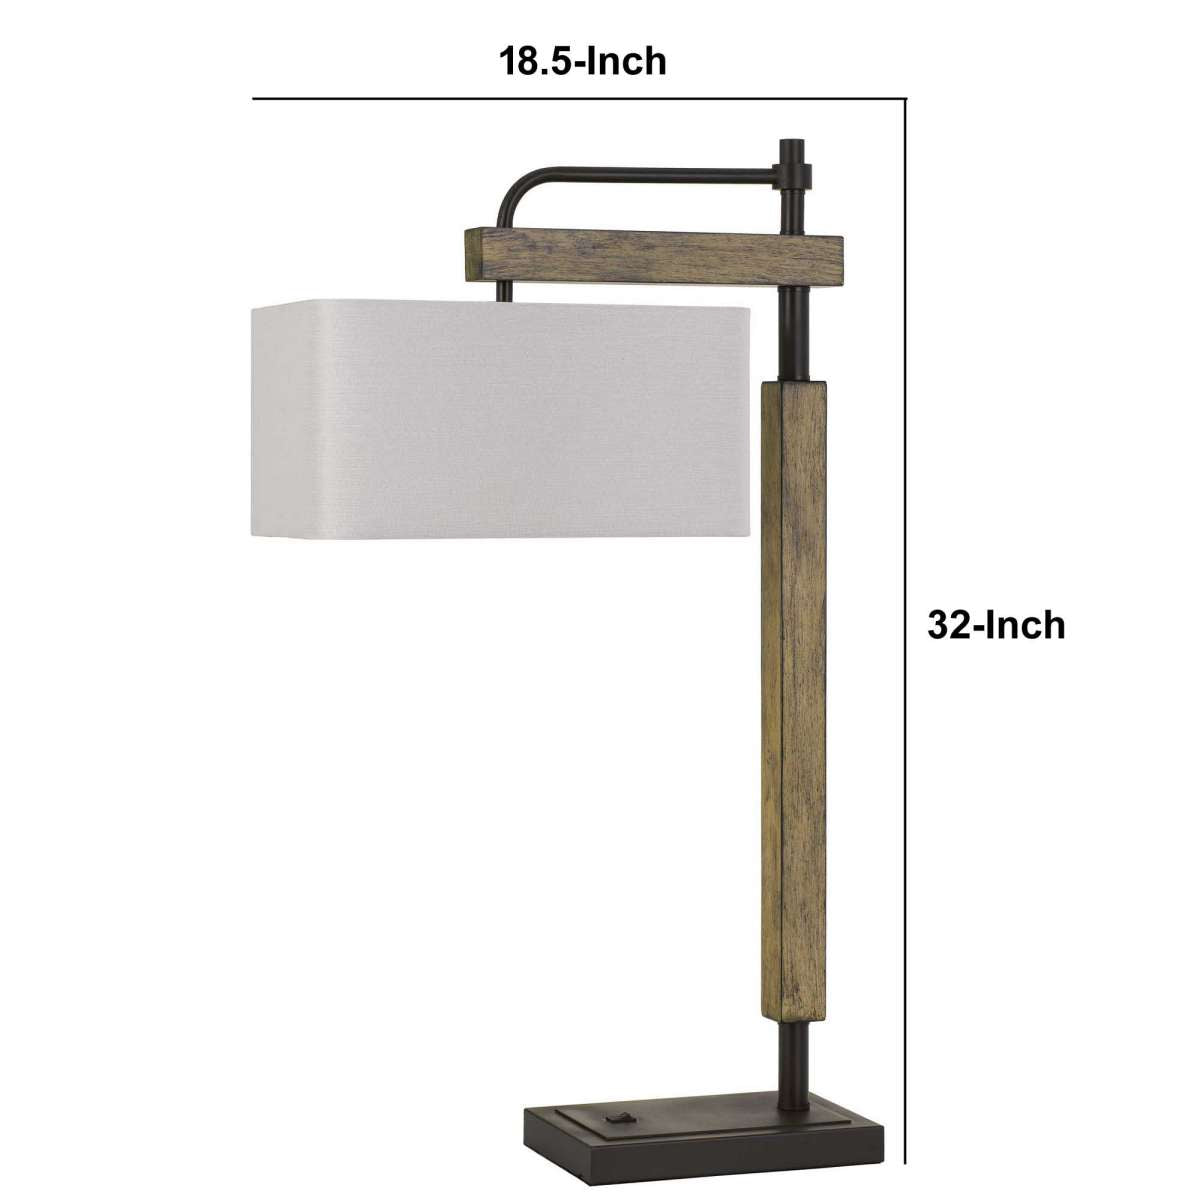 32" Metal Desk Lamp With Downbridge Style Shade, Black And Brown By Benzara